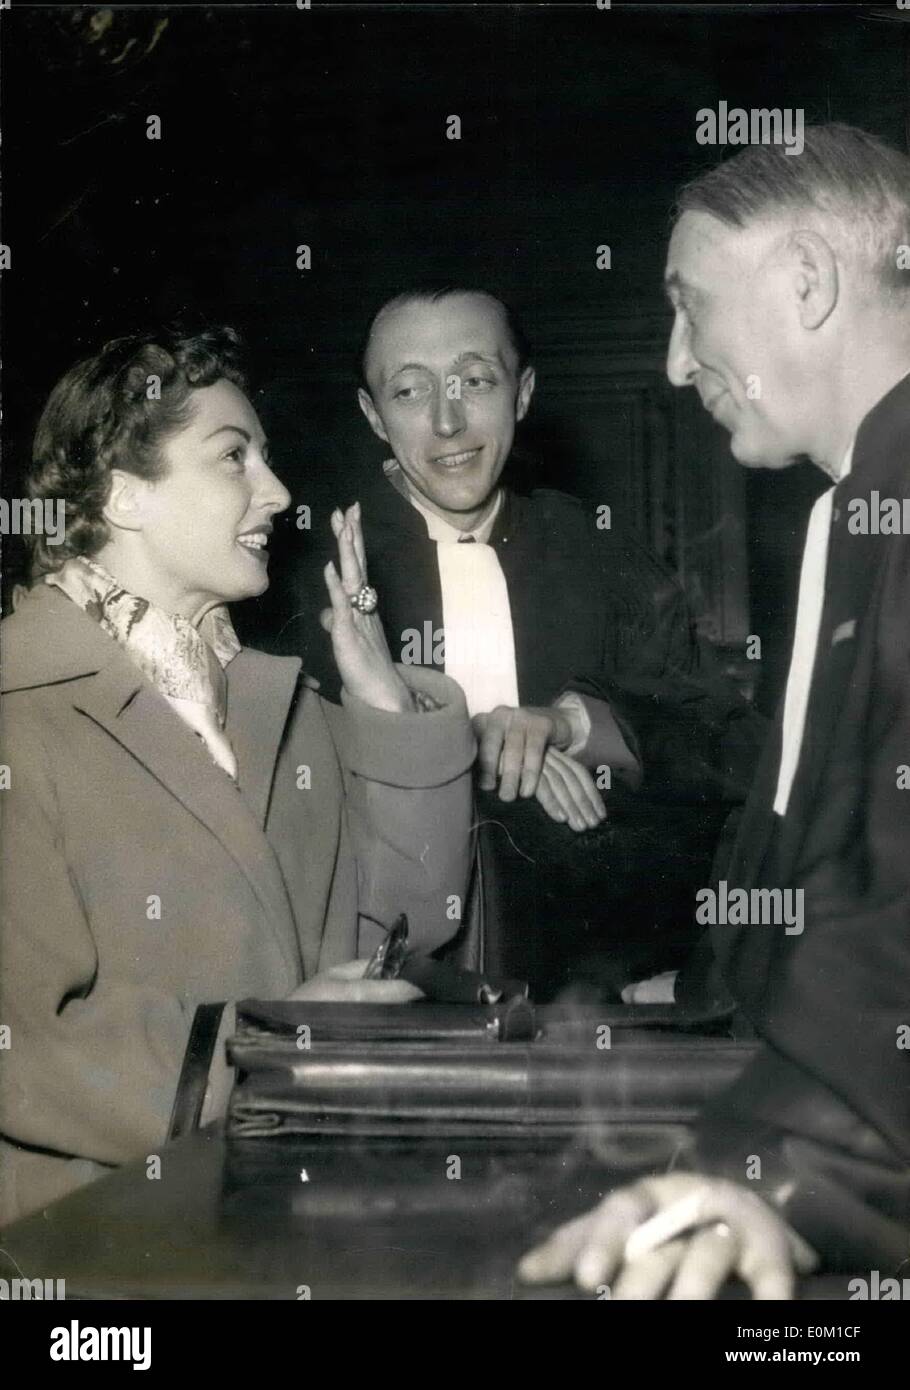 Mar. 03, 1953 - Film star sued for breach of contract.: Viviane Romane the famous French screen star is seen hare with her lawyer, me Macrice Garcon who had the task of proving that the breach of a film contract imputed to her client was none of her fault. Stock Photo